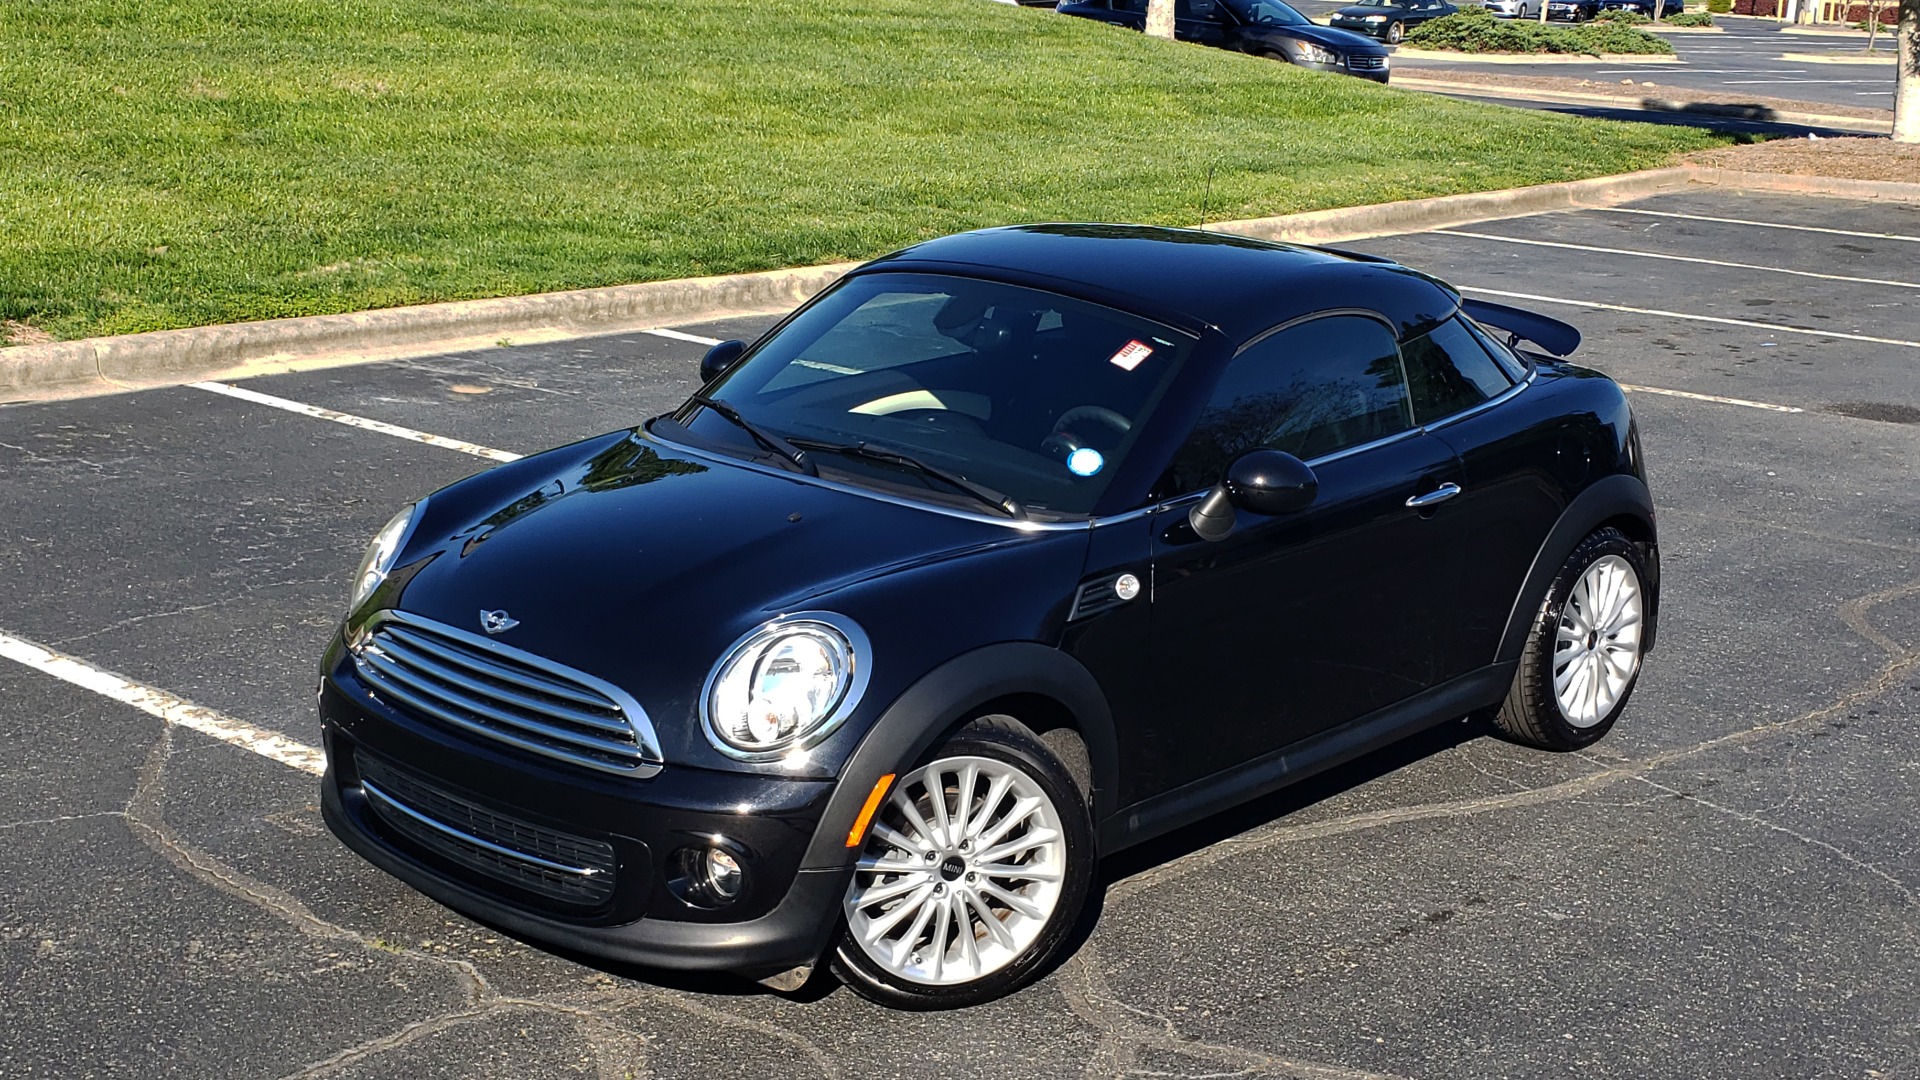 Used 2014 MINI COOPER COUPE FWD / 6-SPD MAN / 17IN WHEELS / LOW MILES for sale Sold at Formula Imports in Charlotte NC 28227 3